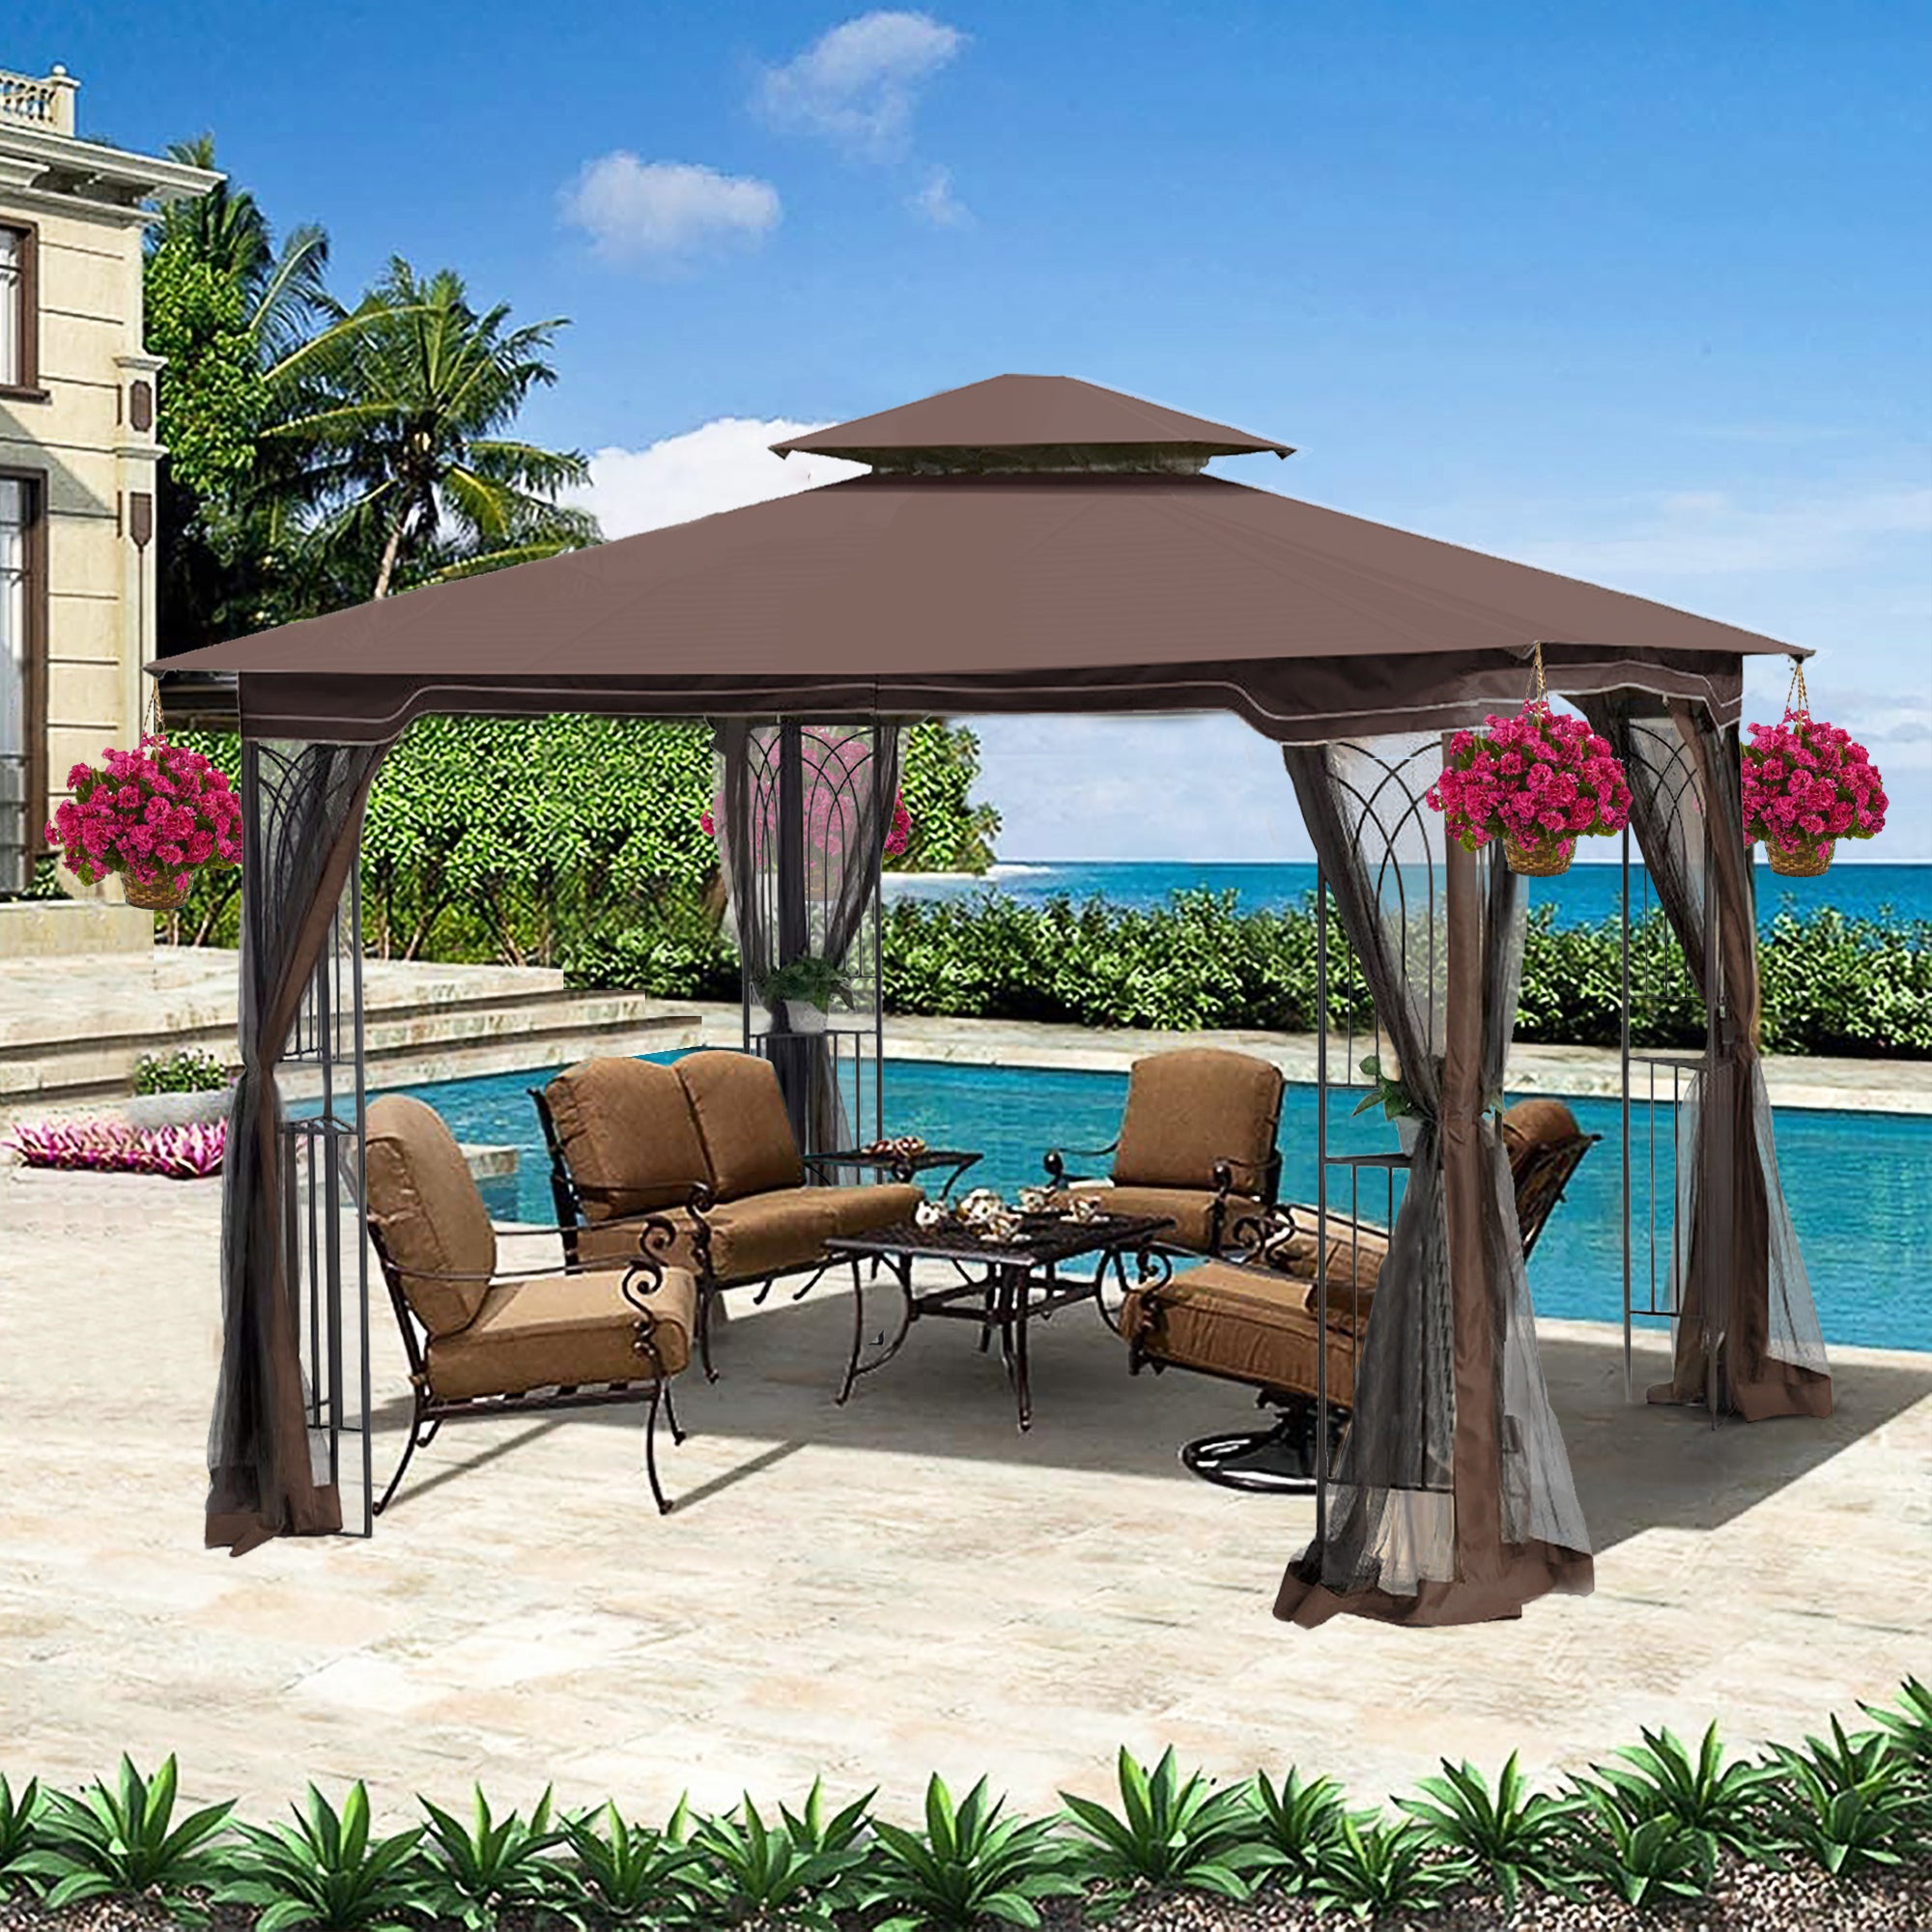 10x10-Outdoor-Patio-Gazebo-Canopy-Tent-With-Ventilated-Double-Roof-And-Mosquito-net(Detachable-Mesh-Screen-On-All-Sides)-Umbrellas-&-Sunshades